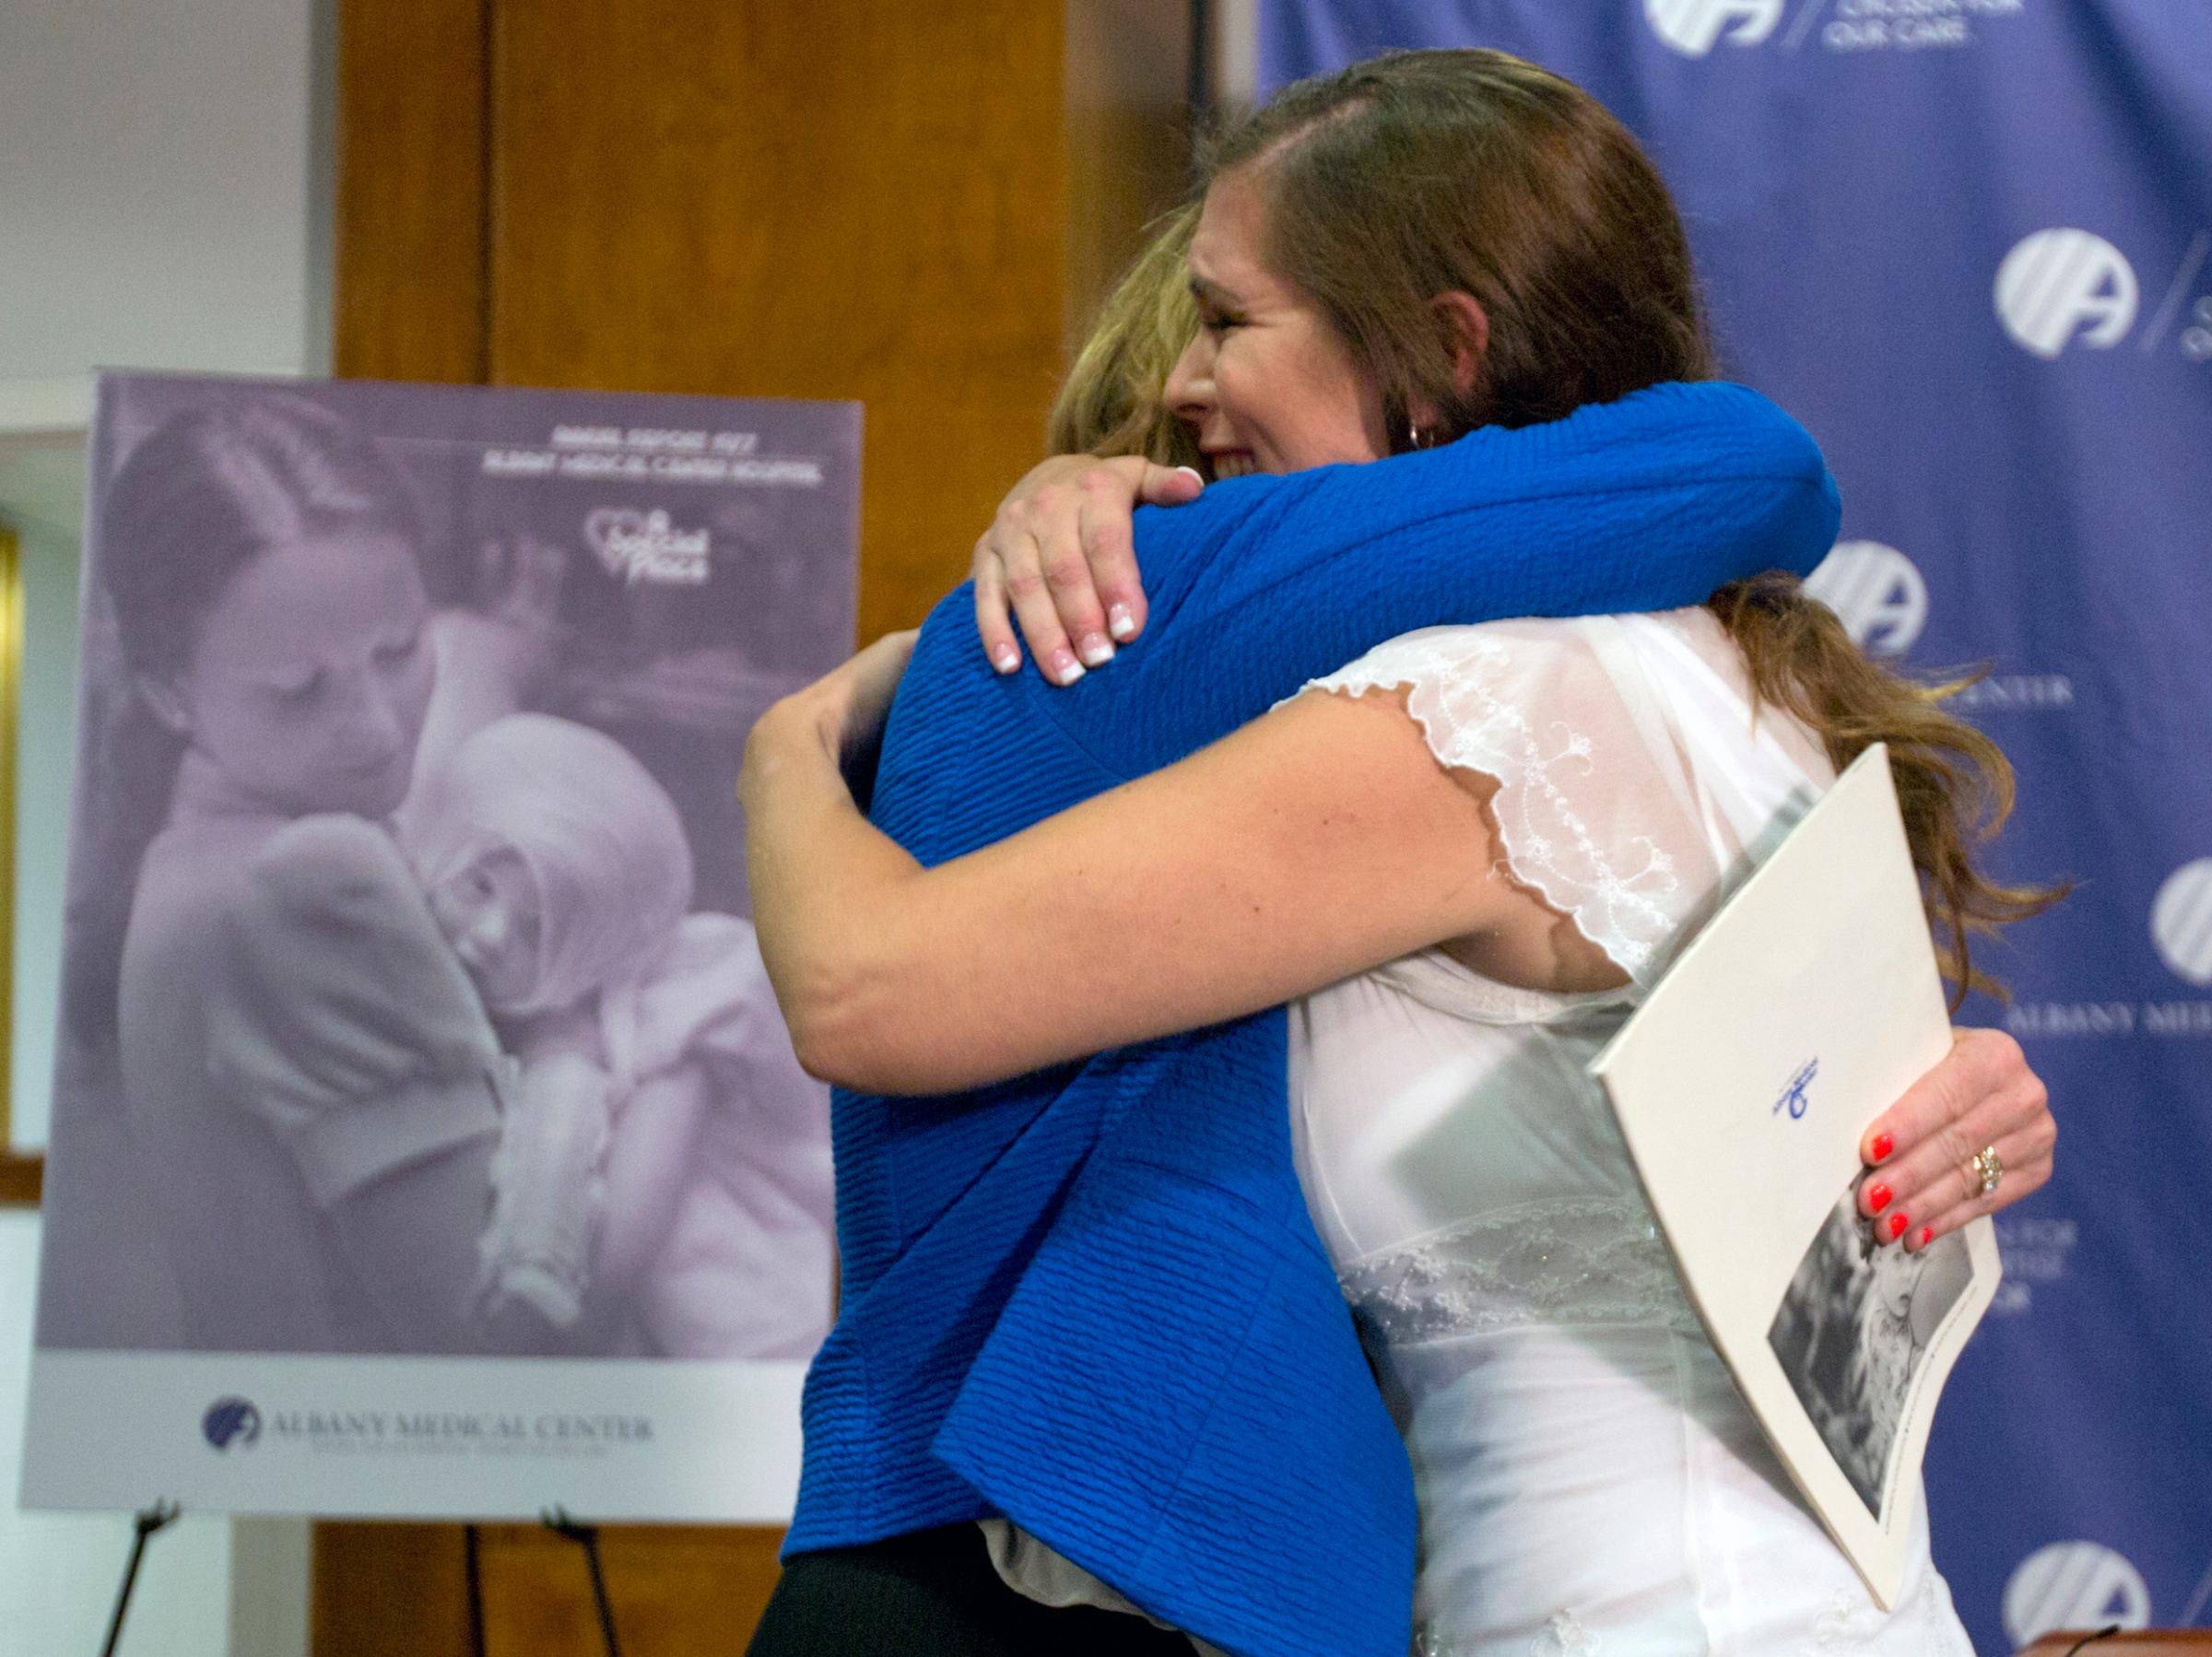 Nurse Susan Berger (L) and Amanda Scarpinati hug during a news conference at Albany Medical Center in Albany, N.Y. on Sept. 29, 2015.